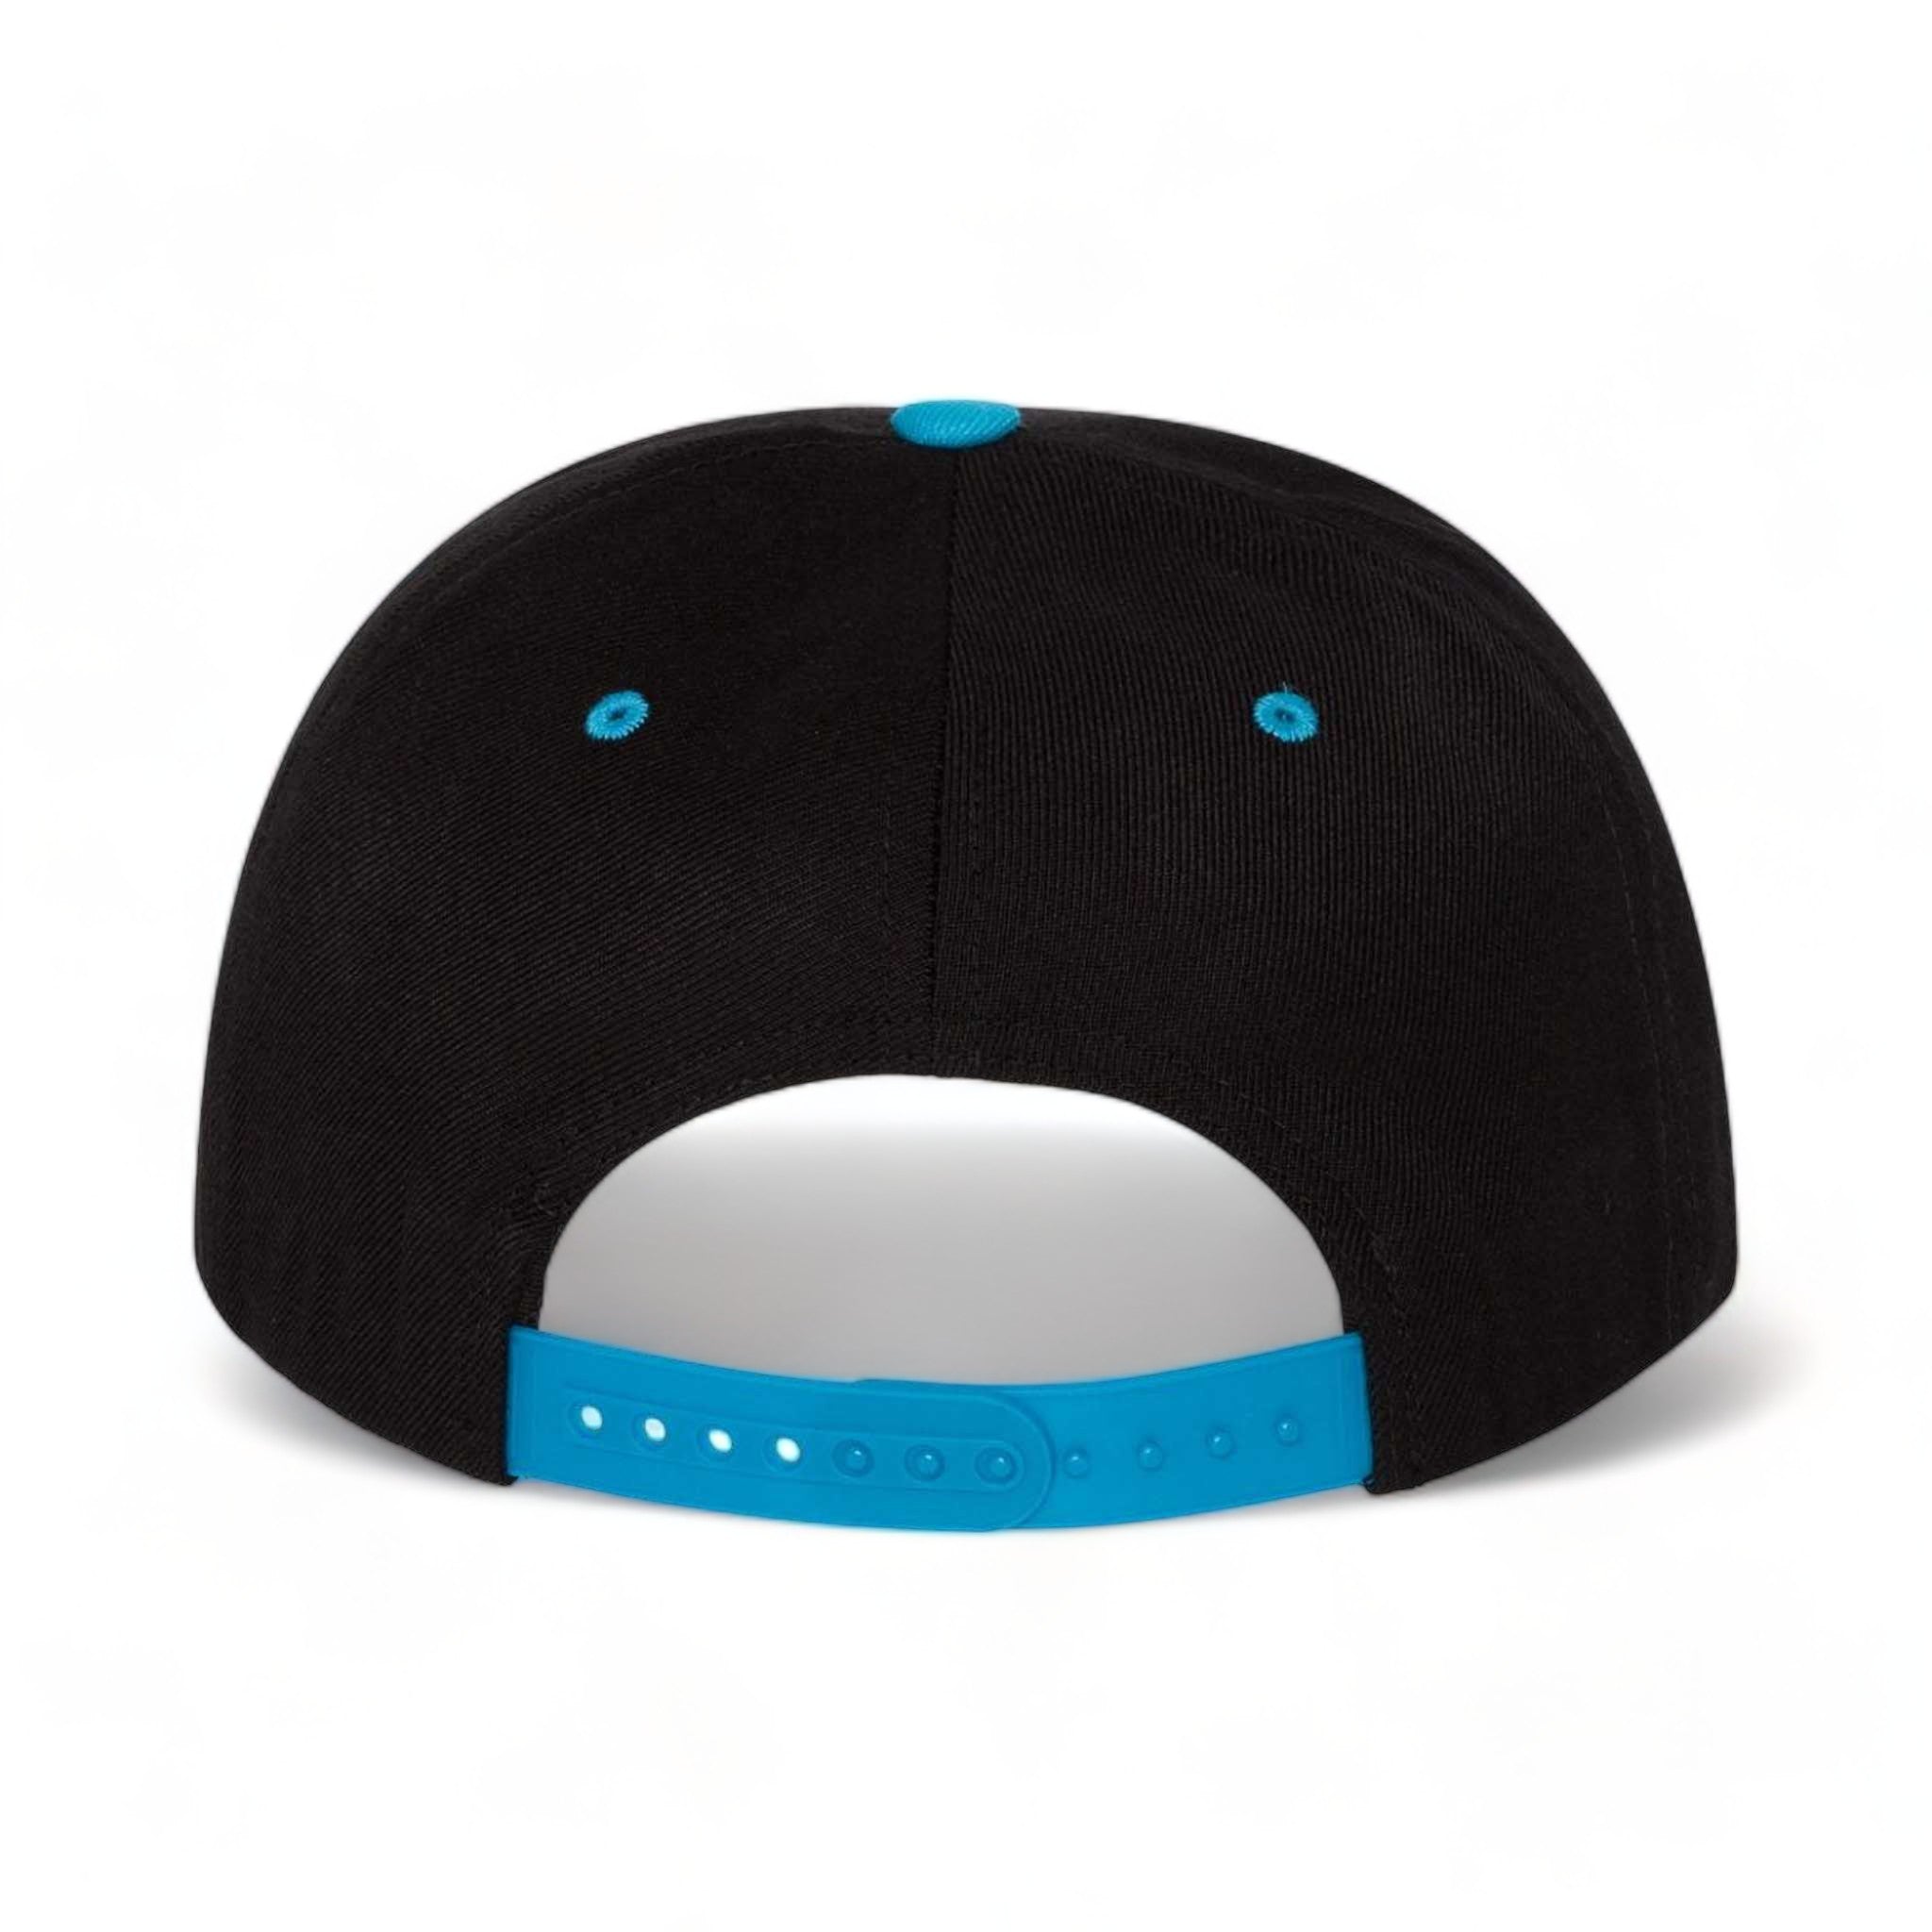 Back view of YP Classics 6089M custom hat in black and teal